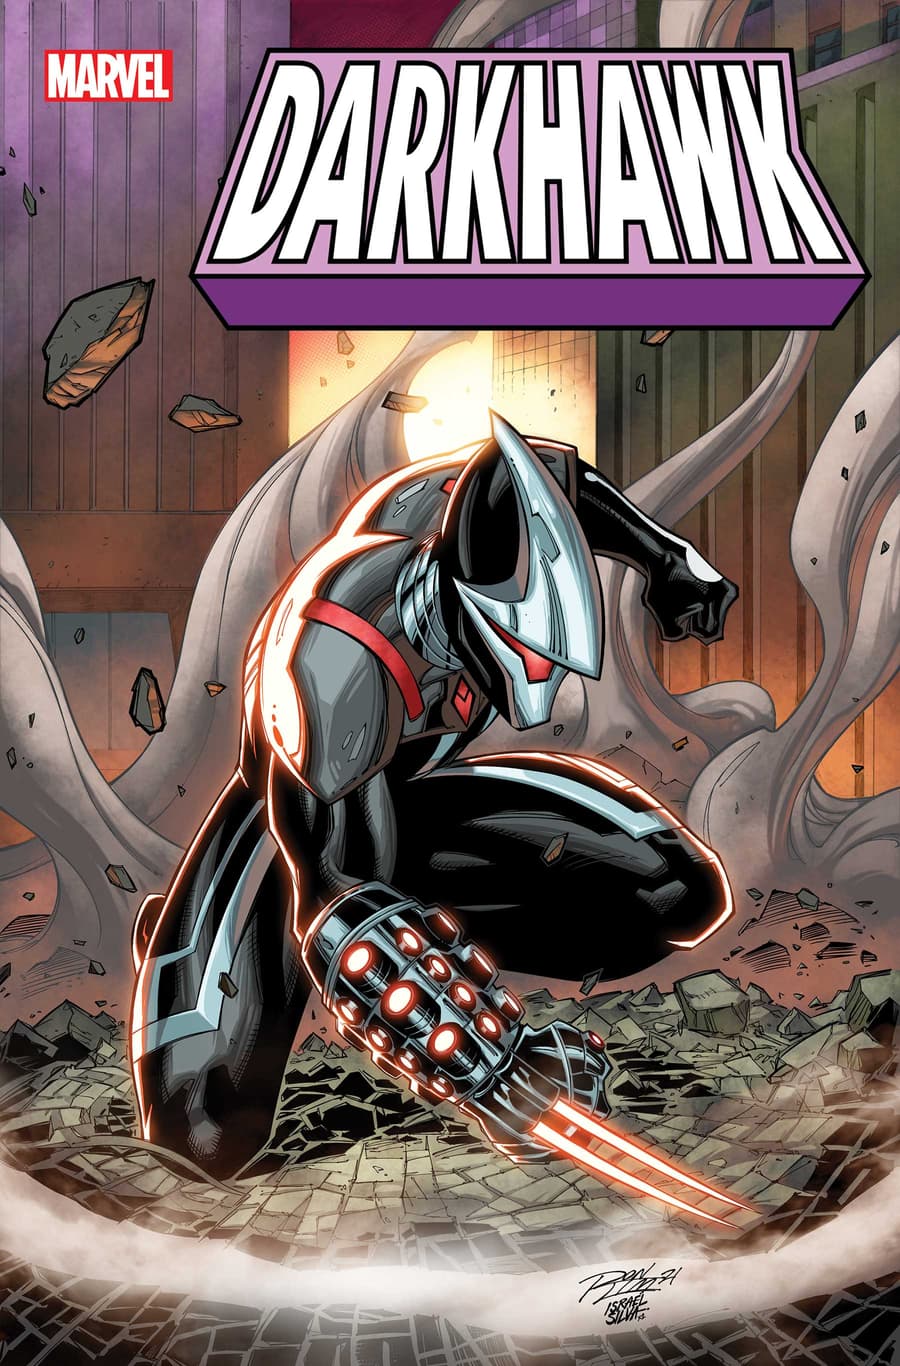 DARKHAWK #1 variant cover by Ron Lim